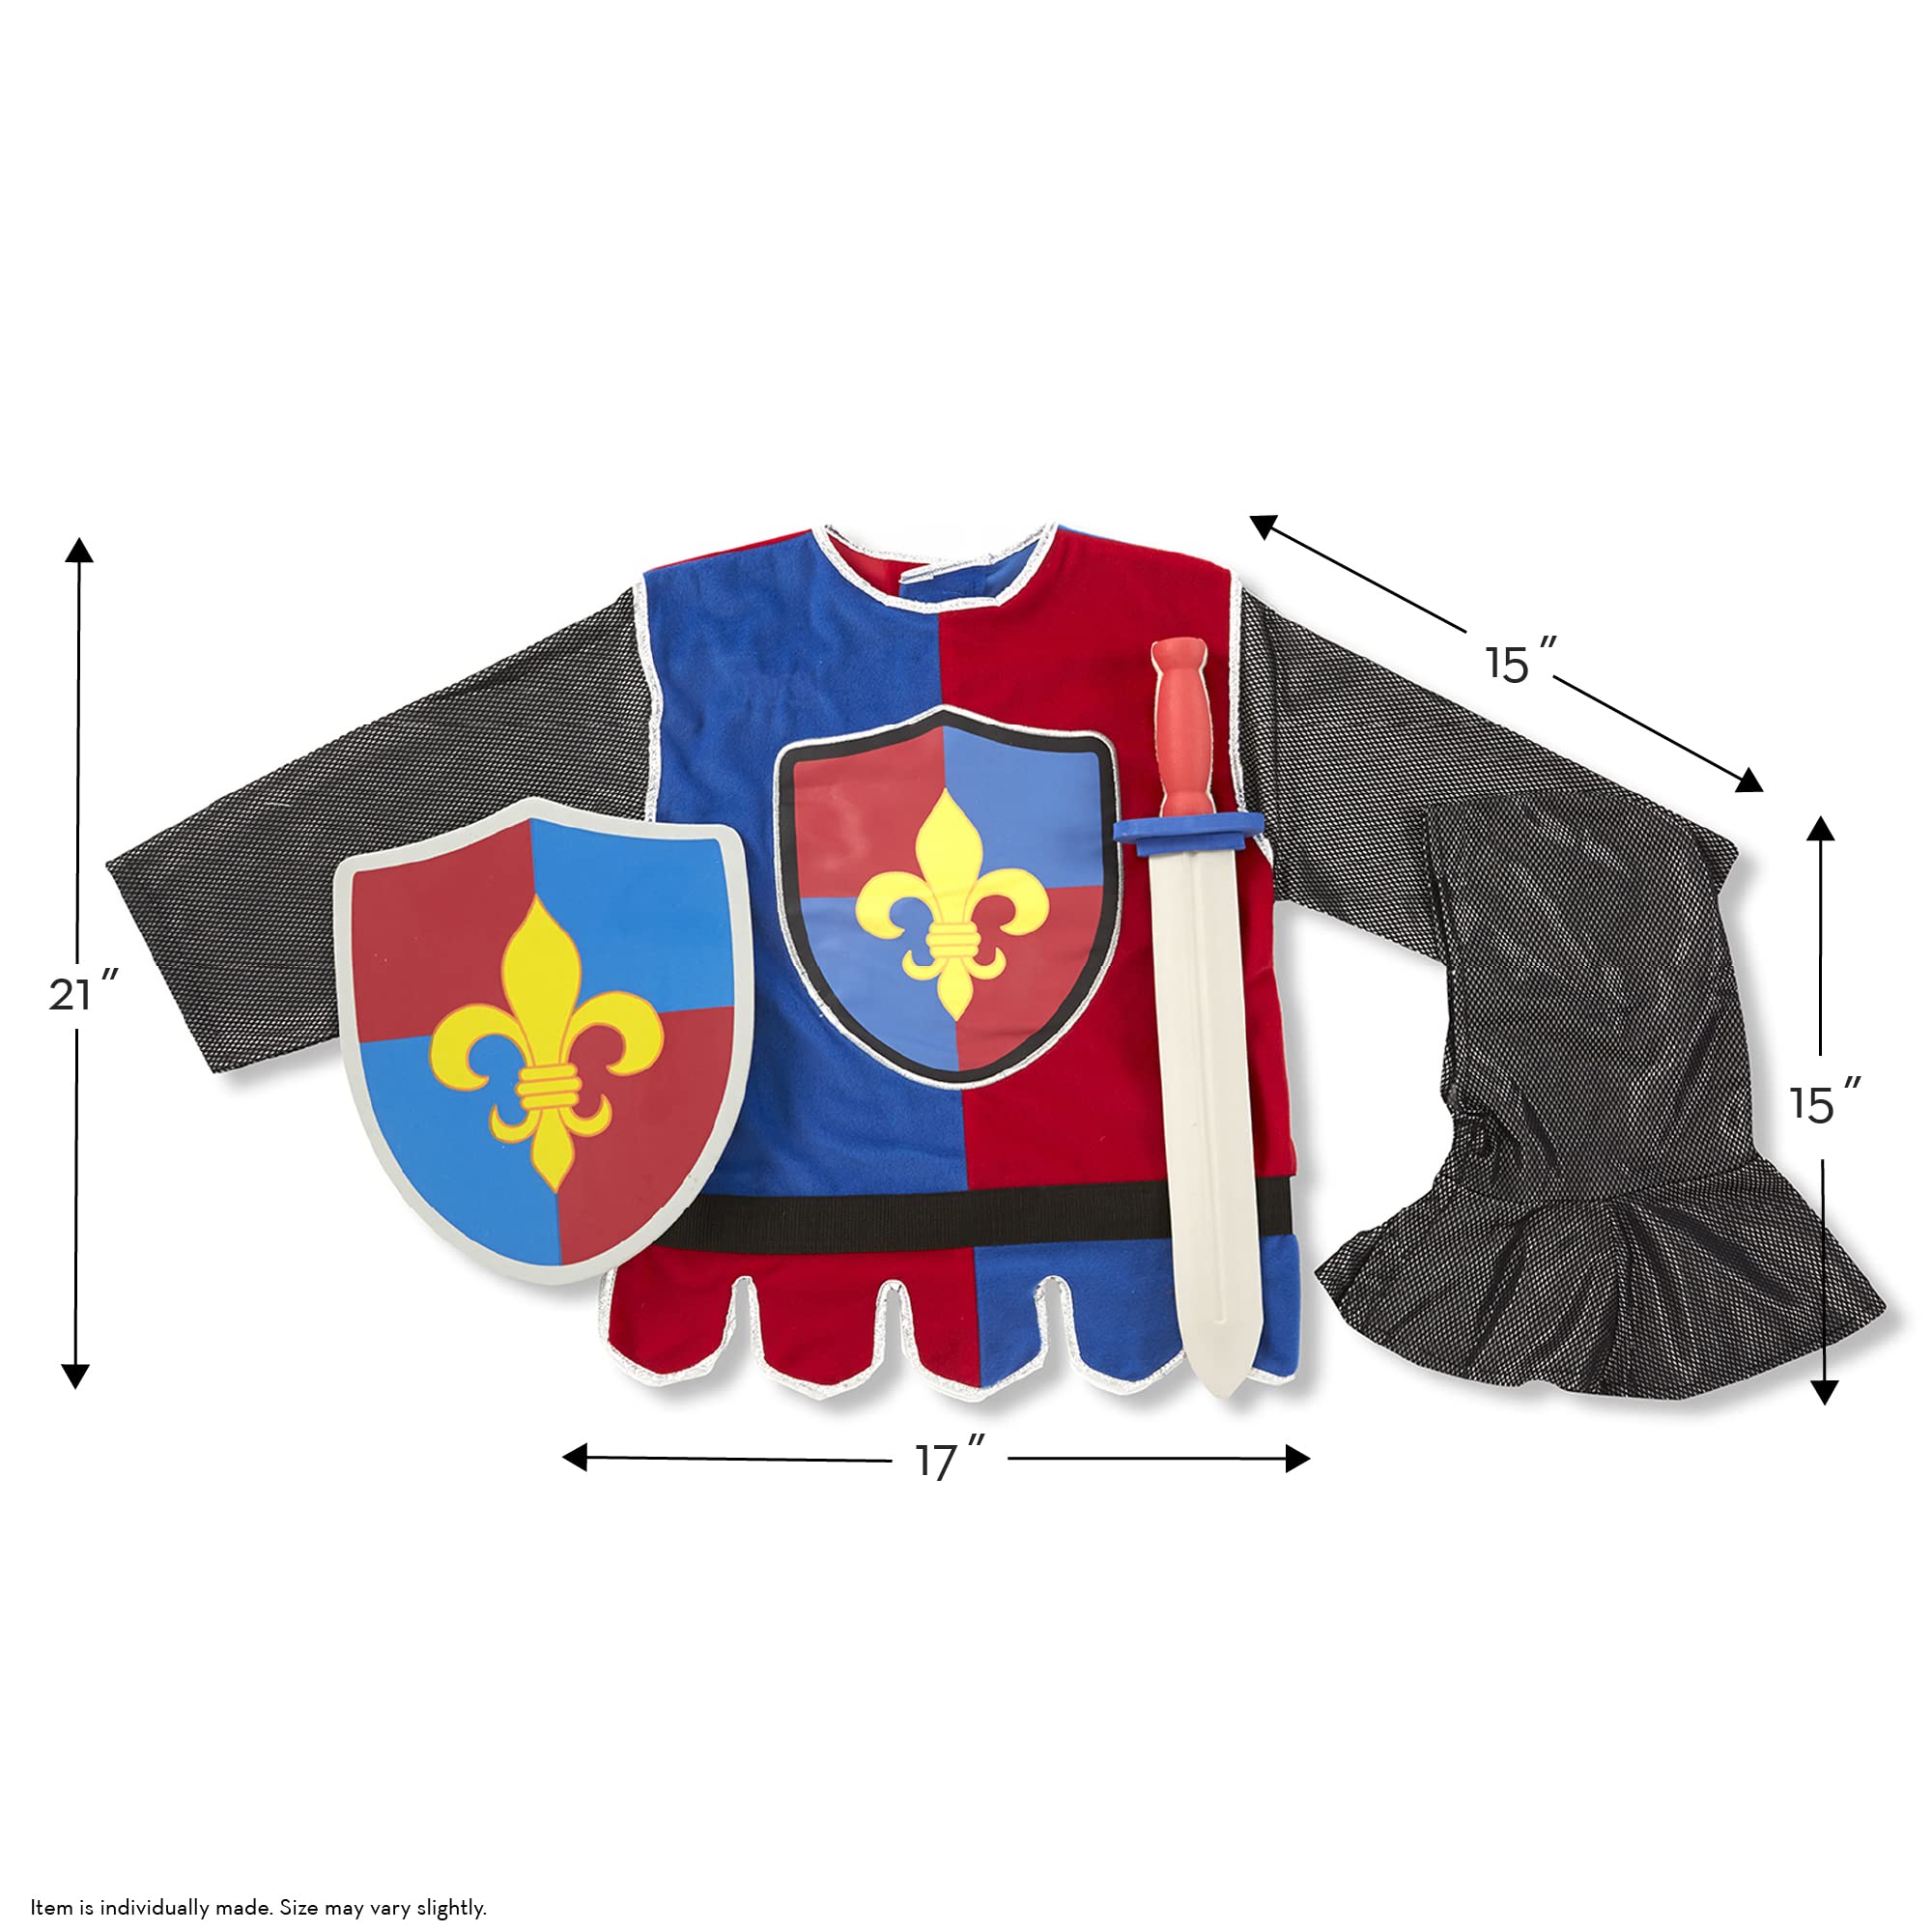 Melissa & Doug Knight Role Play Set - Medieval Knight Costume Pretend Play Dress-Up Costume Set For Toddlers And Kids Ages 3+